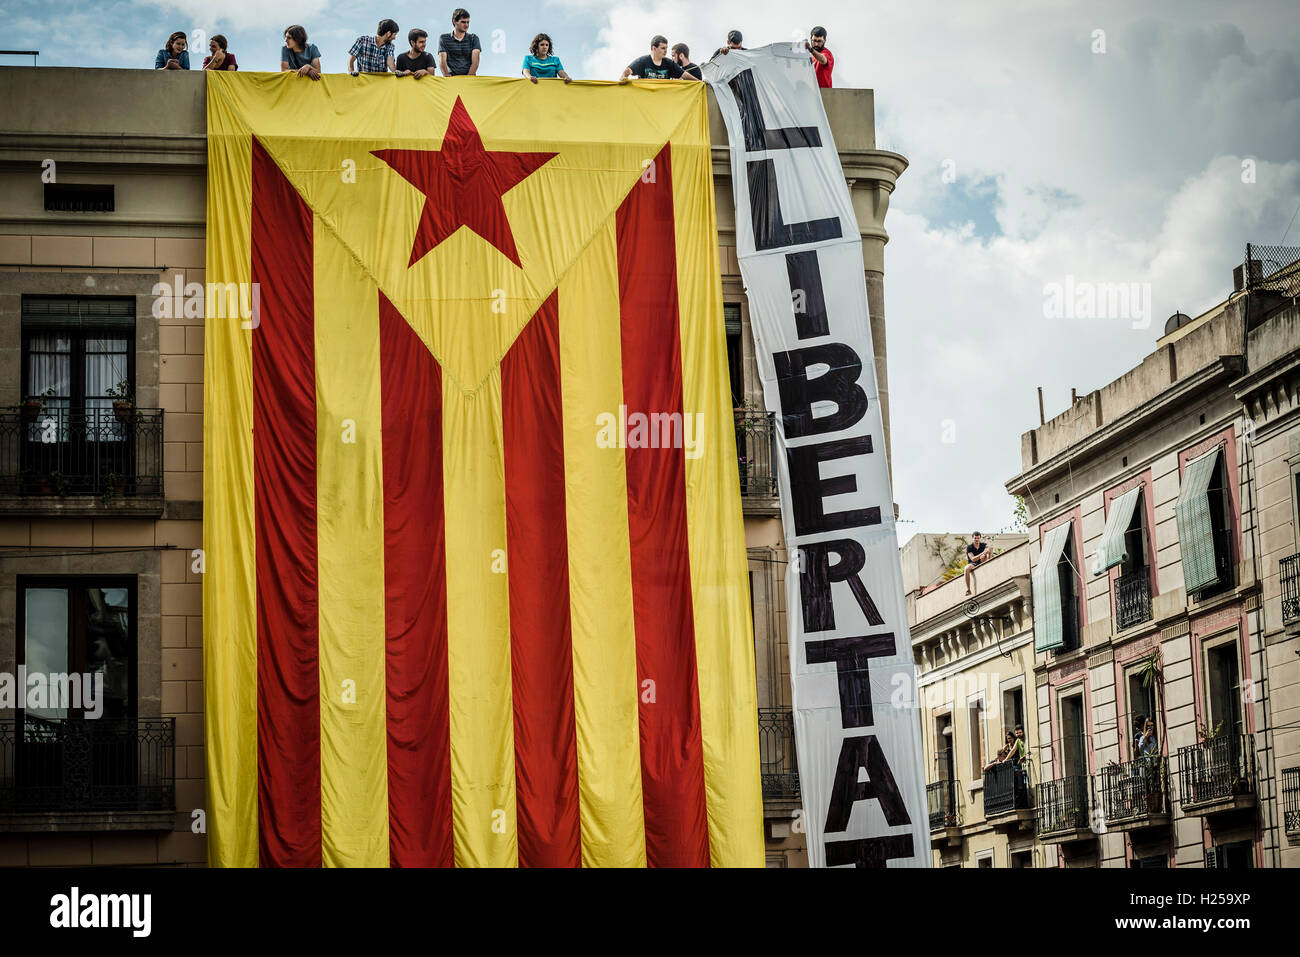 Barcelona, Spain. 24th September, 2016:  Pro-independence supporters hang a giant 'estelada' flag on the facade of a building facing the St Jaume Place demanding 'freedom' during the local 'Castellers' day at the Merce 2016 Credit:  matthi/Alamy Live News Stock Photo